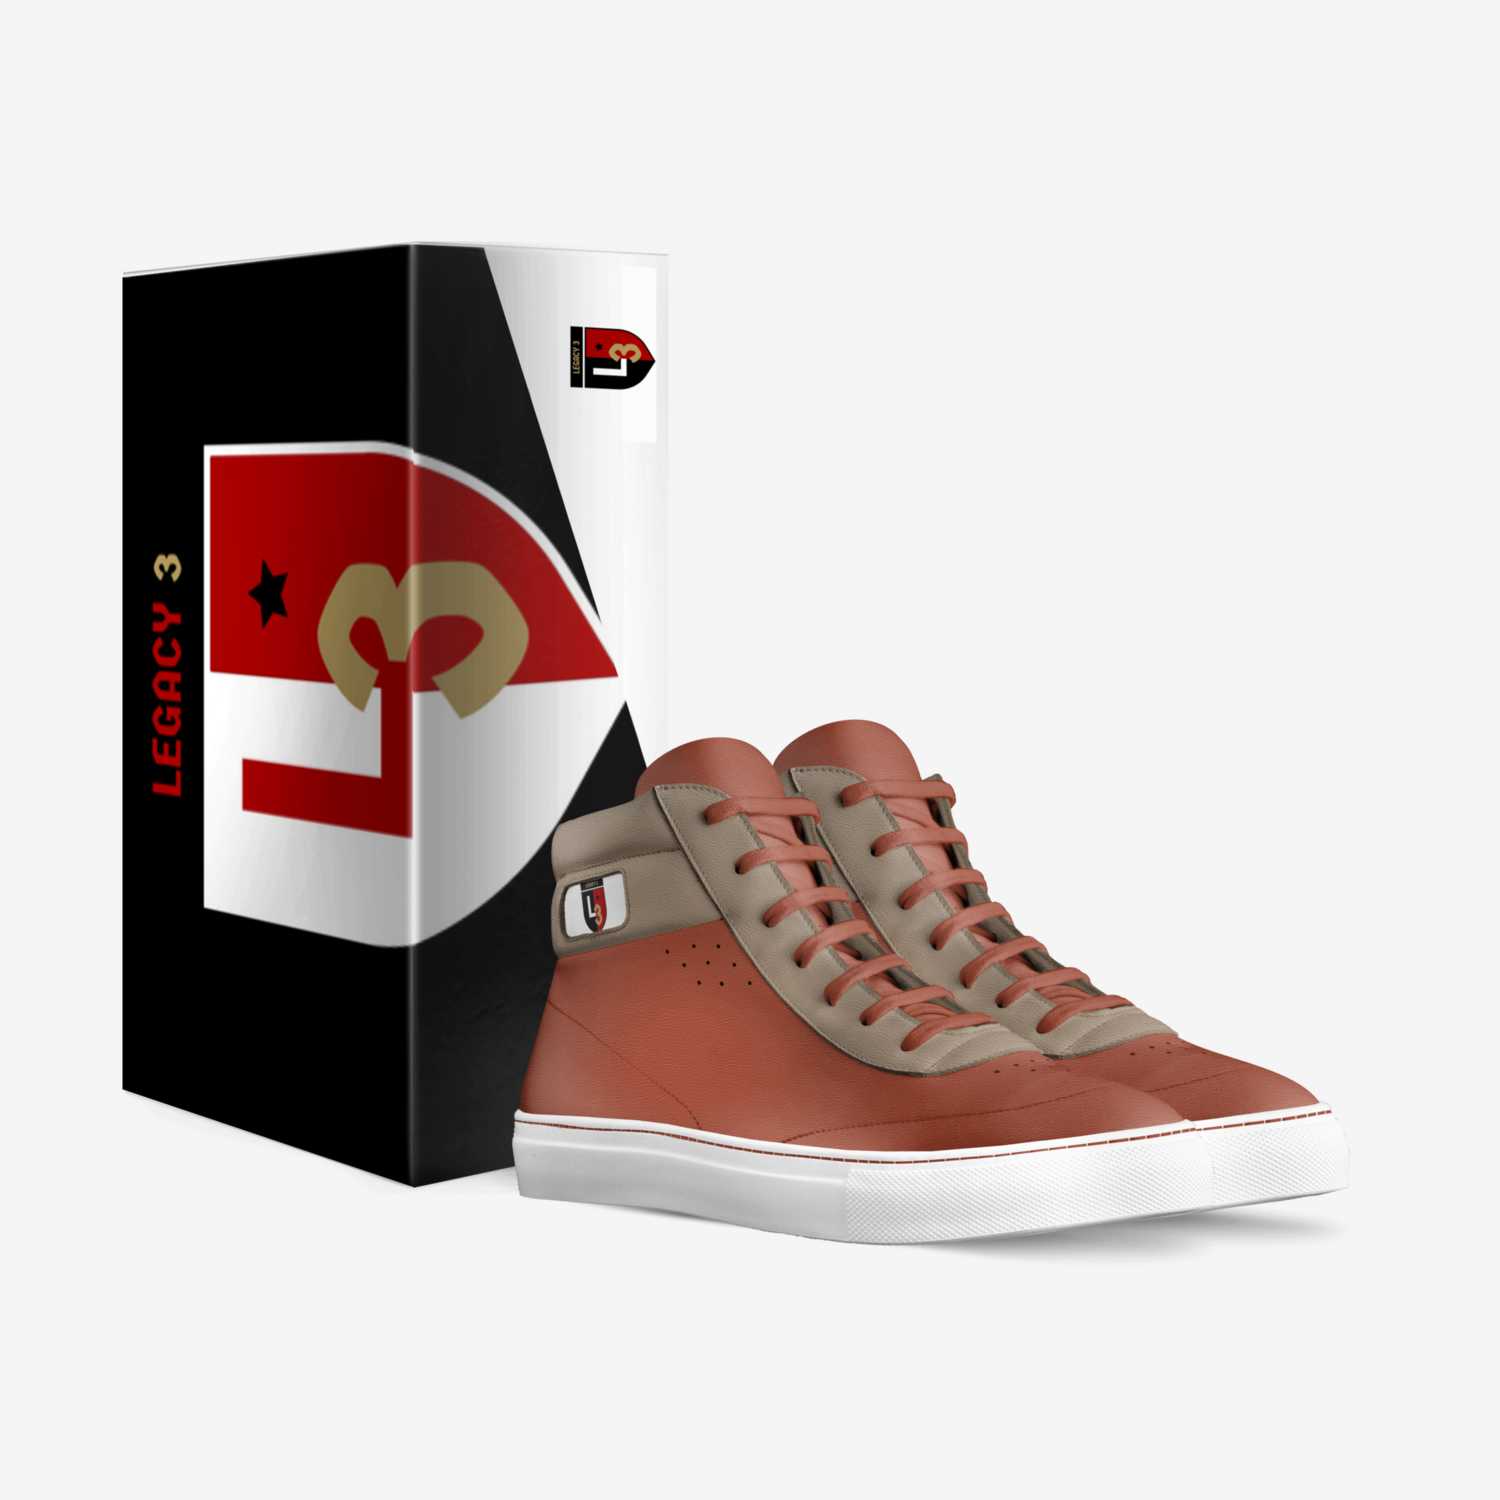 Legacy 3 custom made in Italy shoes by Kyle Lovett | Box view